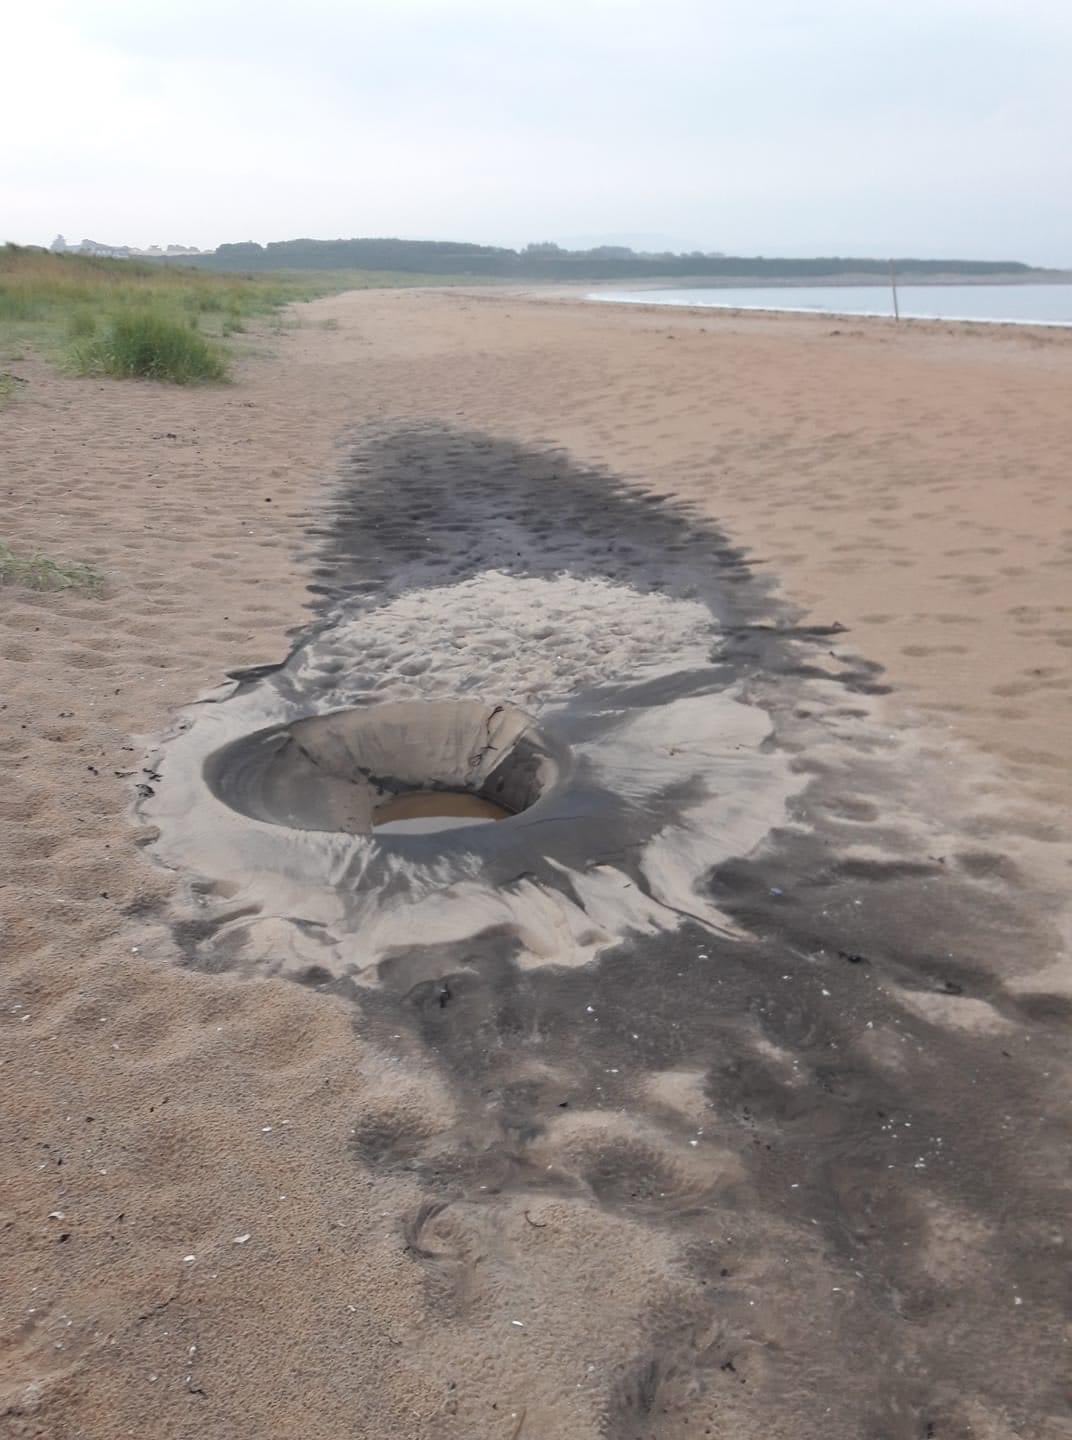 Last night, lightning struck Dornoch beach in Scotland, and that's how the scene looks like after it.